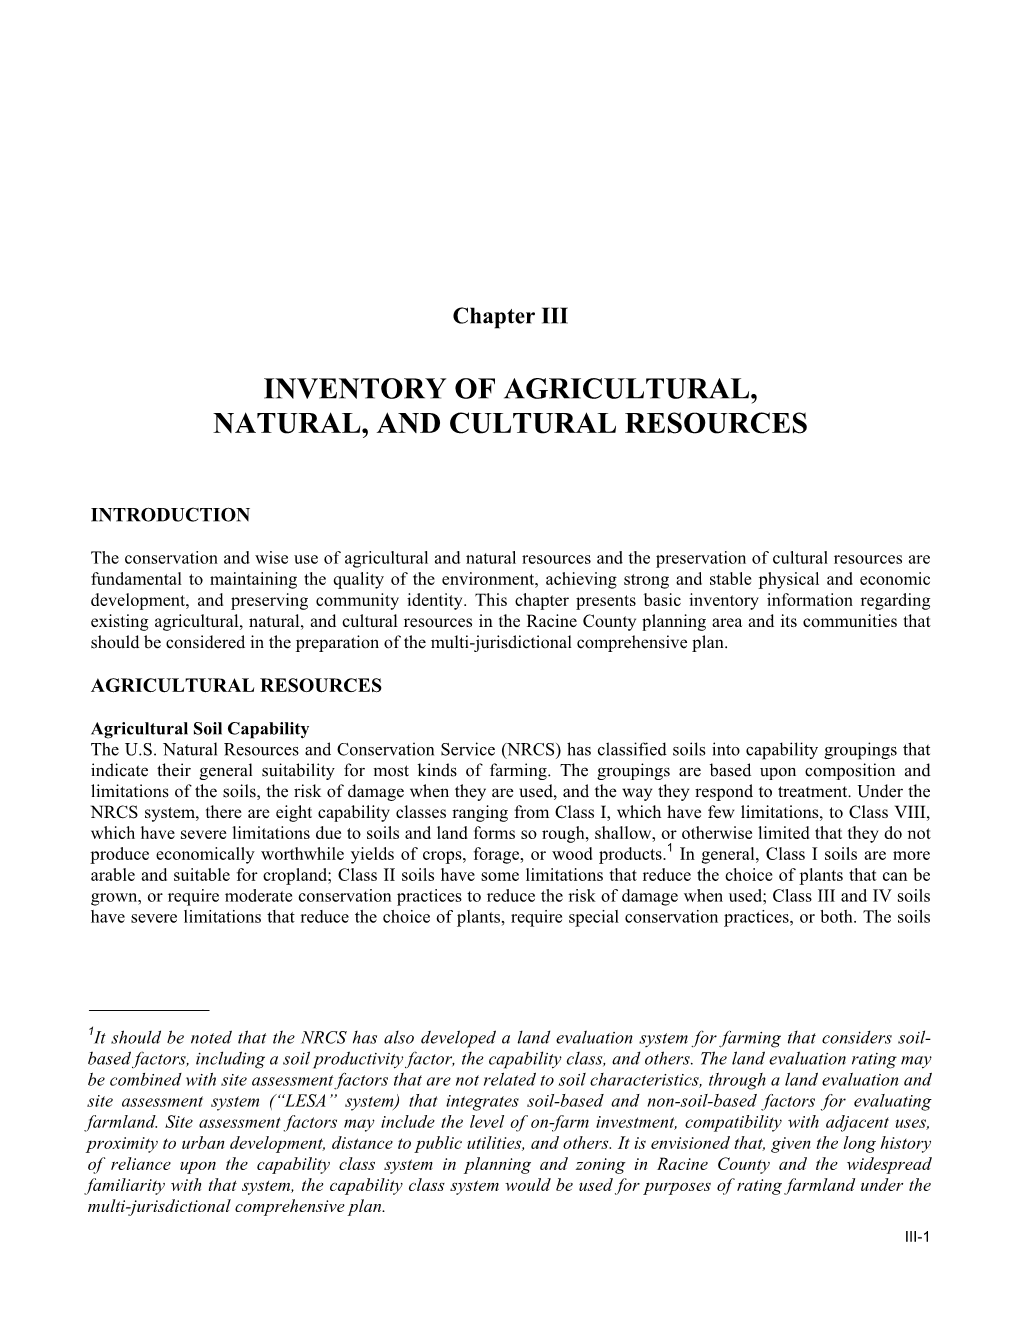 Inventory of Agricultural, Natural, and Cultural Resources